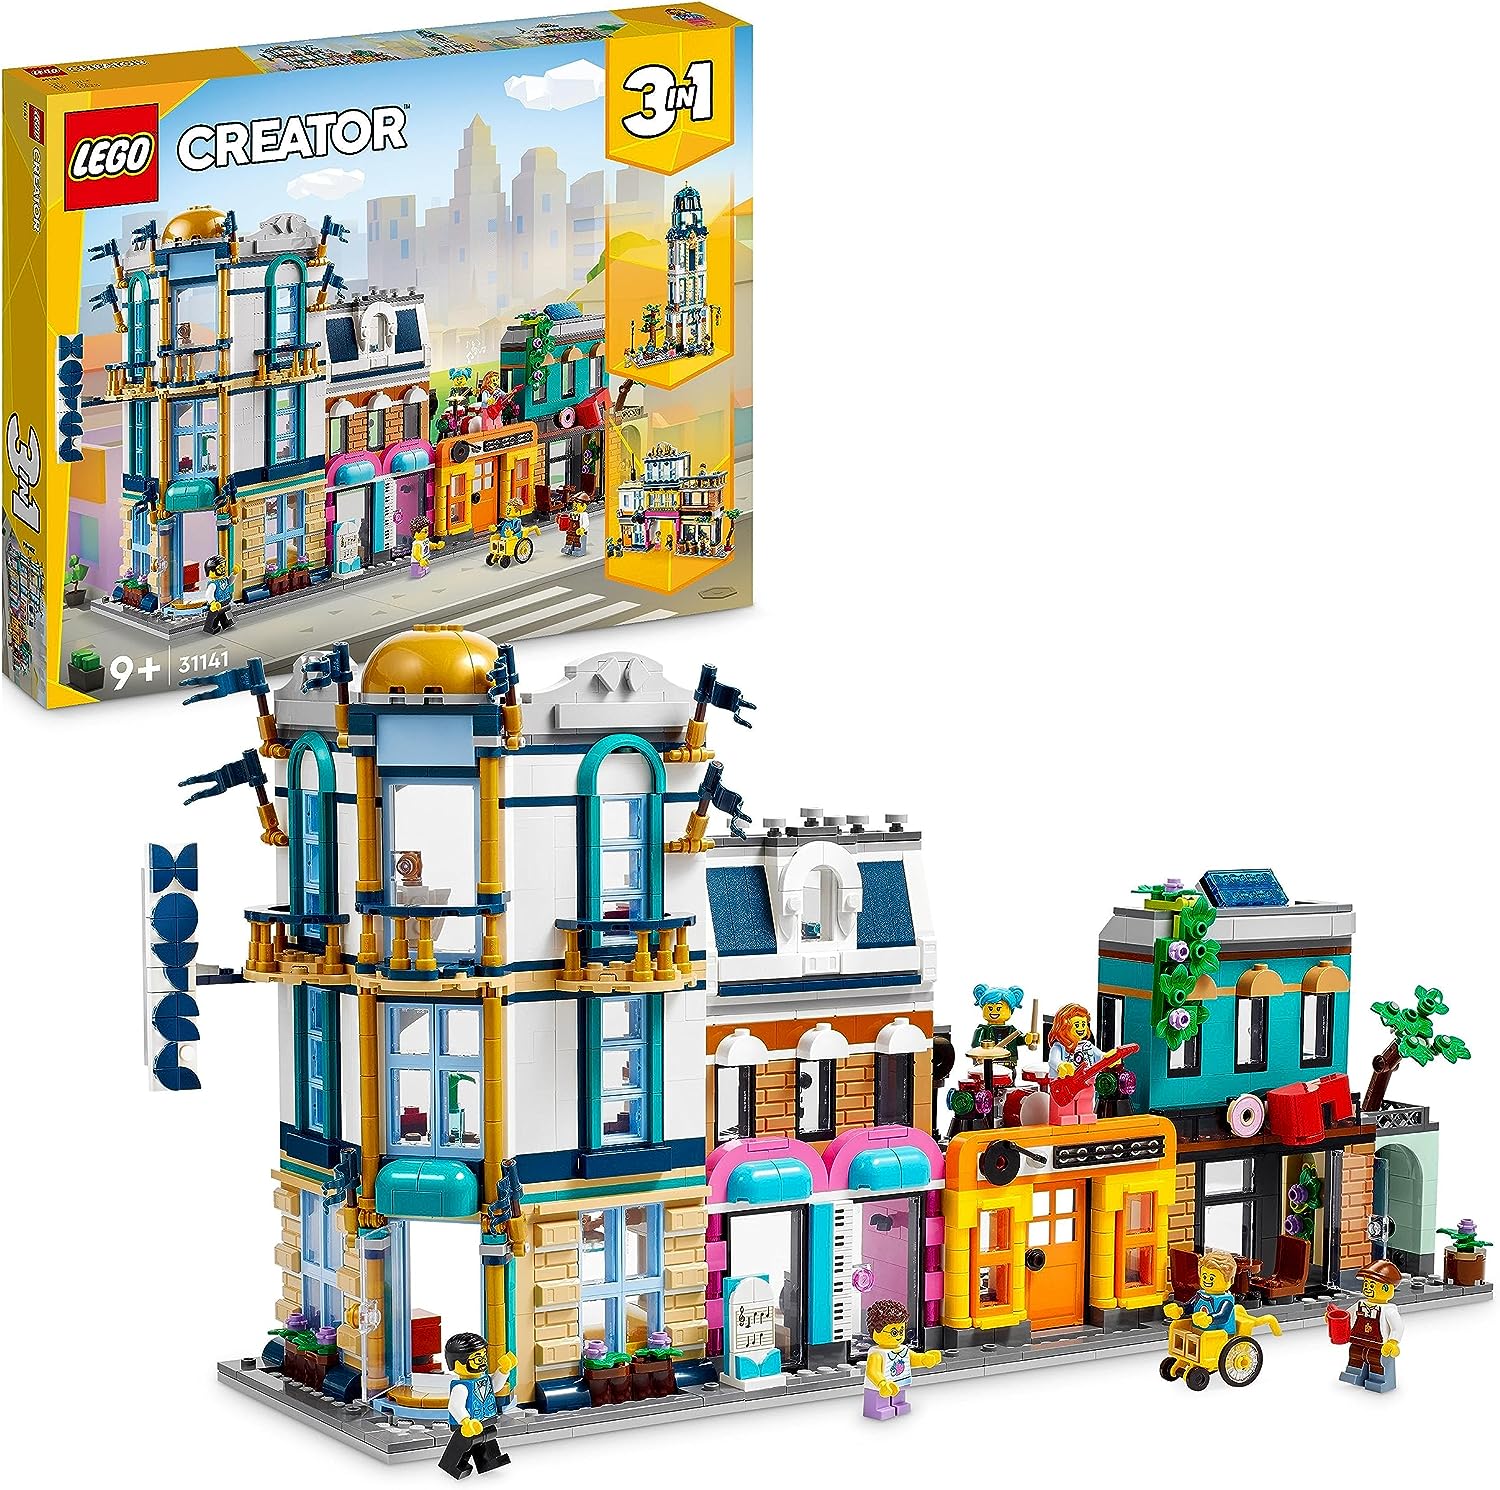 LEGO 31141 Creator 3-in-1 Main Street to Art Deco High Rise or Market Street Model Building Set, Construction Toy with Hotel, Cafe, Apartments and Shops, Creative Model Kit